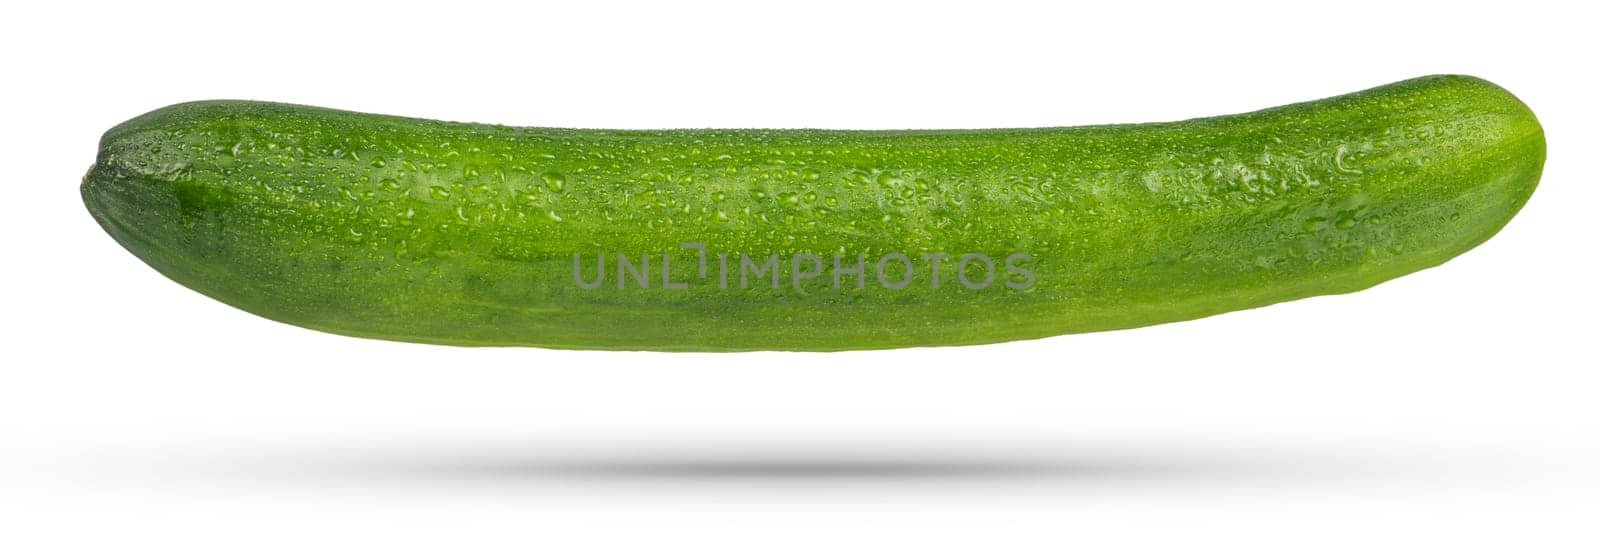 Flying vegetables. Whole green cucumber on a white isolated background. A cucumber hangs or falls casting a shadow on a white background. by SERSOL